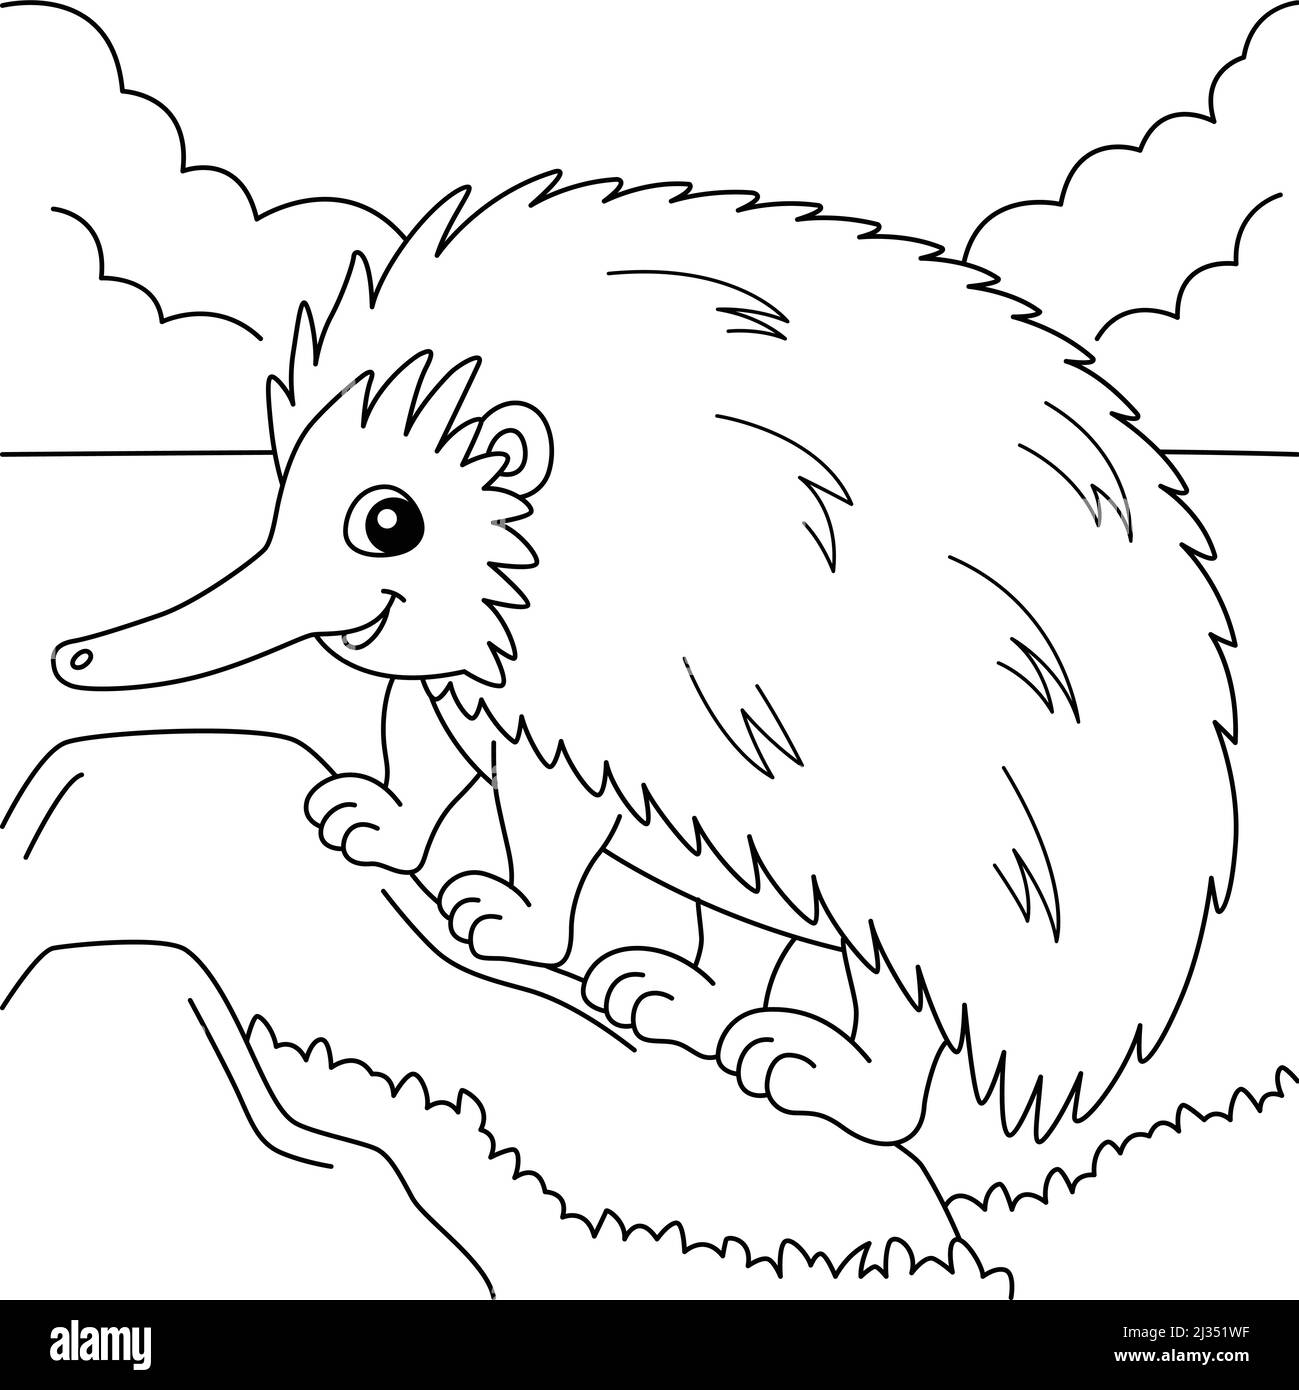 Echidna Animal Coloring Page for Kids Stock Vector